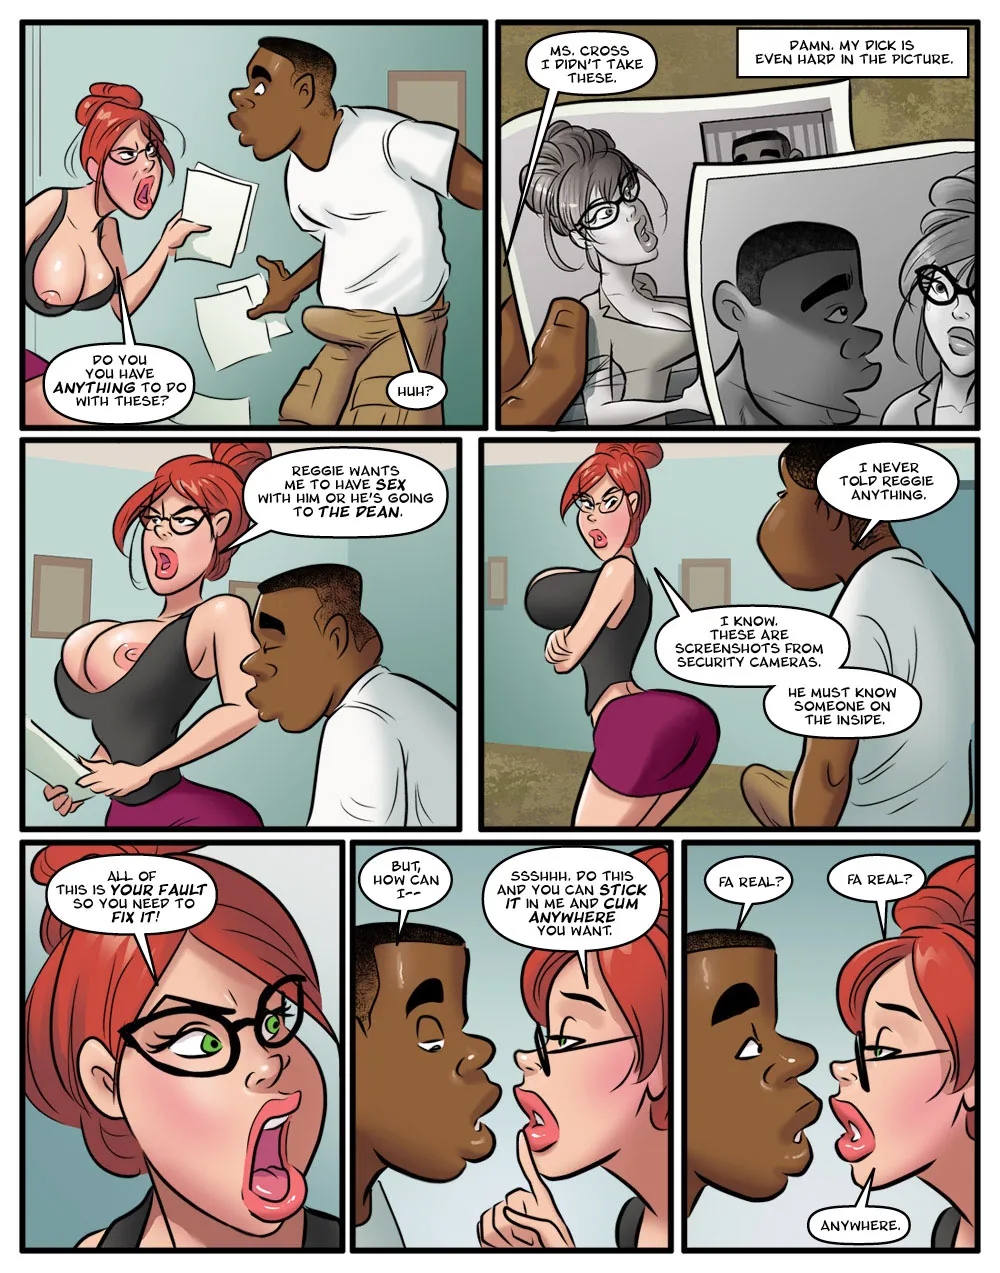 Hot for Ms. Cross 2- Moose - Page 21